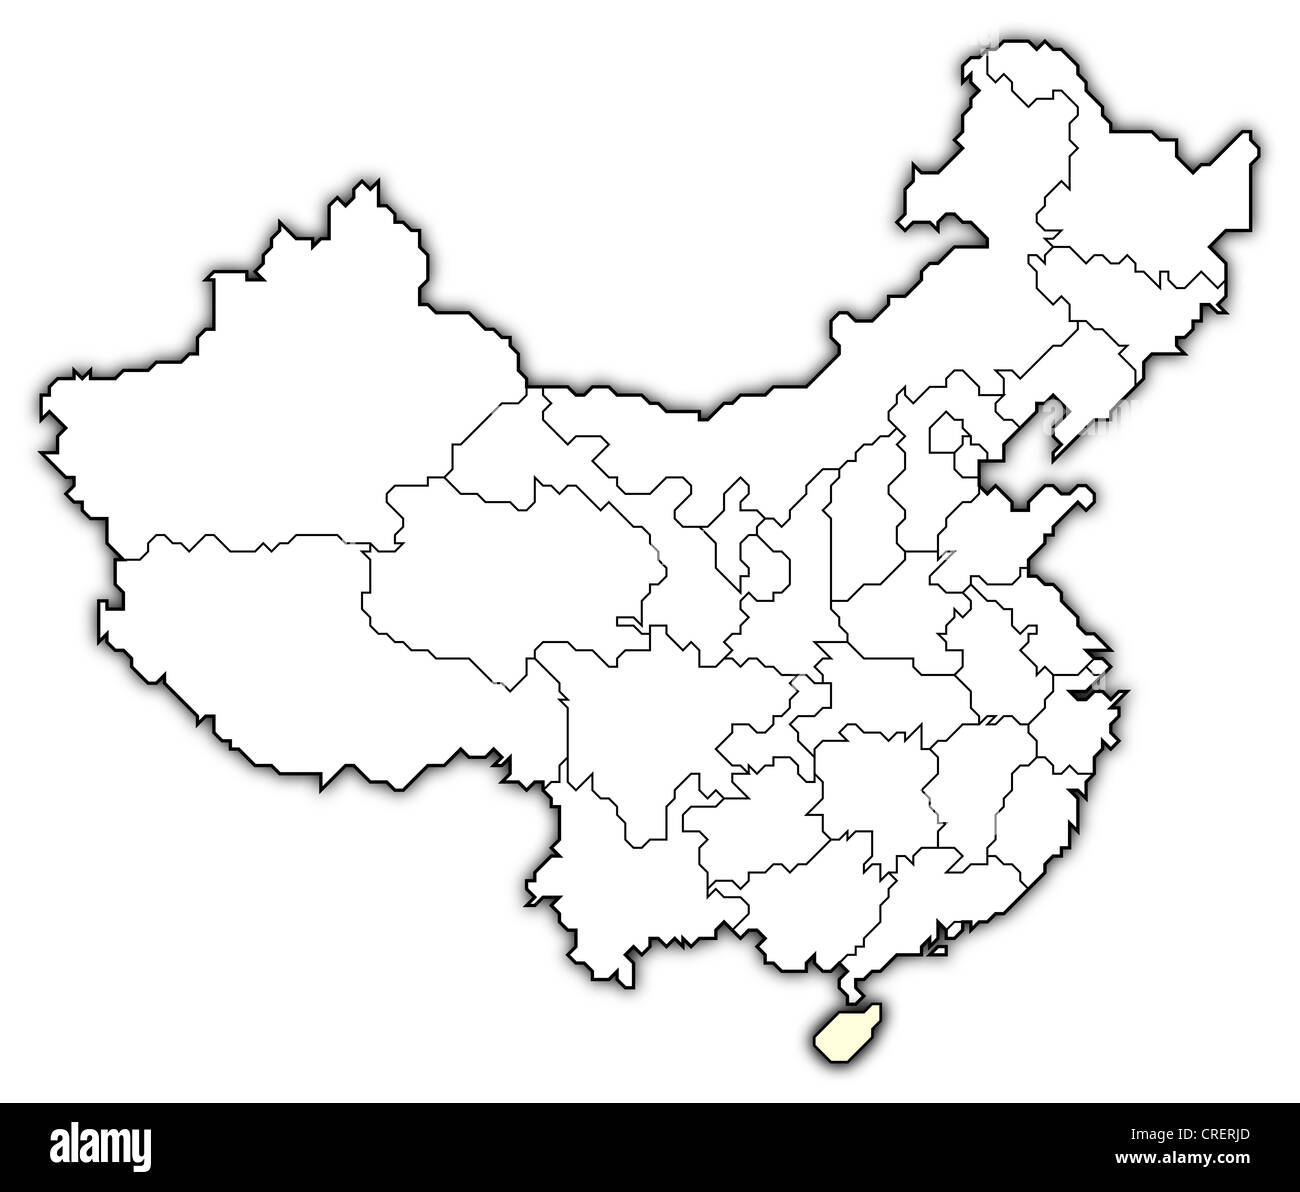 Political map of China with the several provinces where Hainan is highlighted. Stock Photo